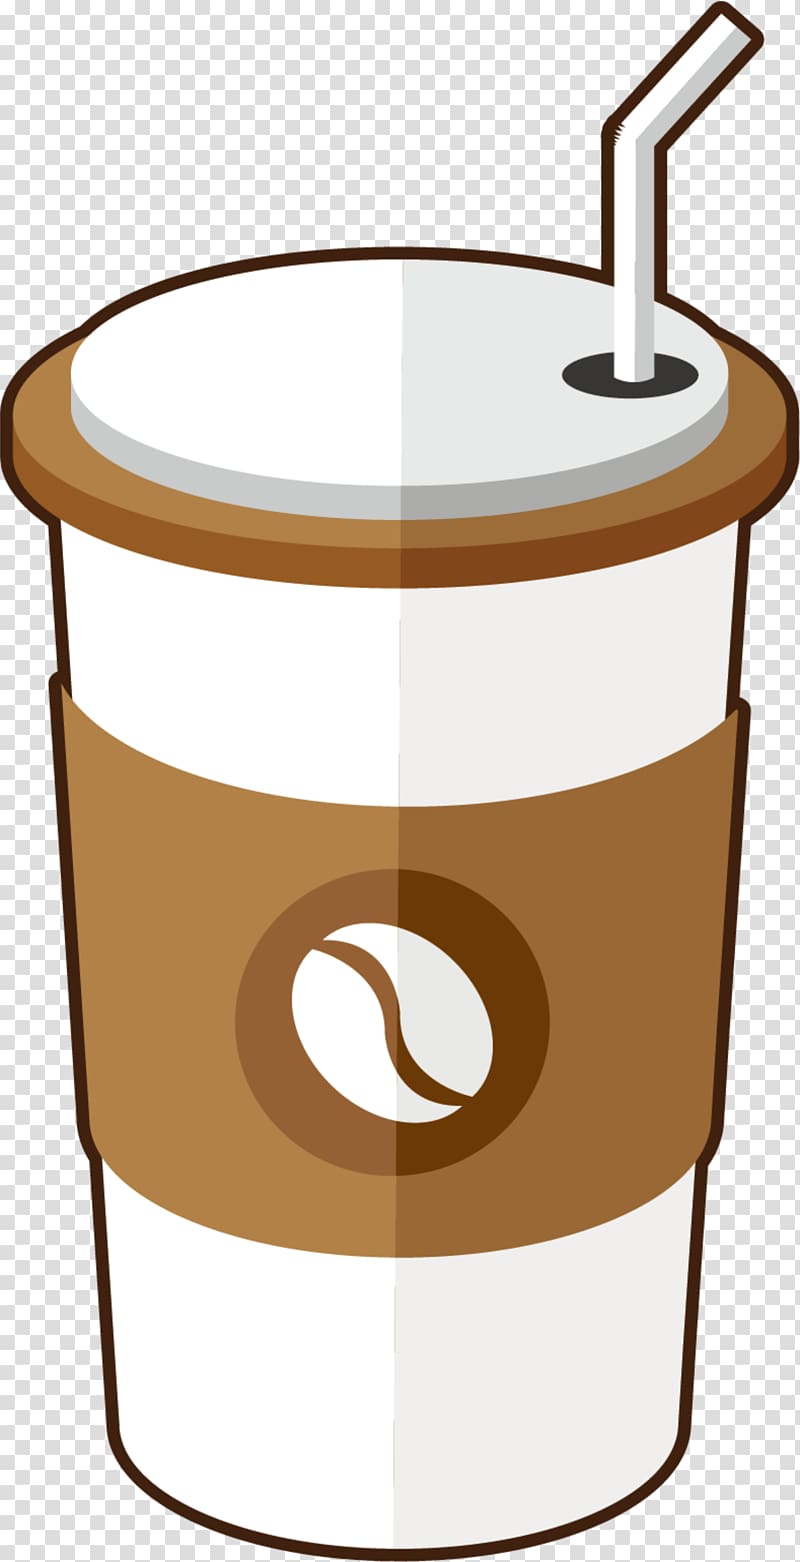 Coffee cup Drinking straw, Small fresh white coffee cup transparent background PNG clipart